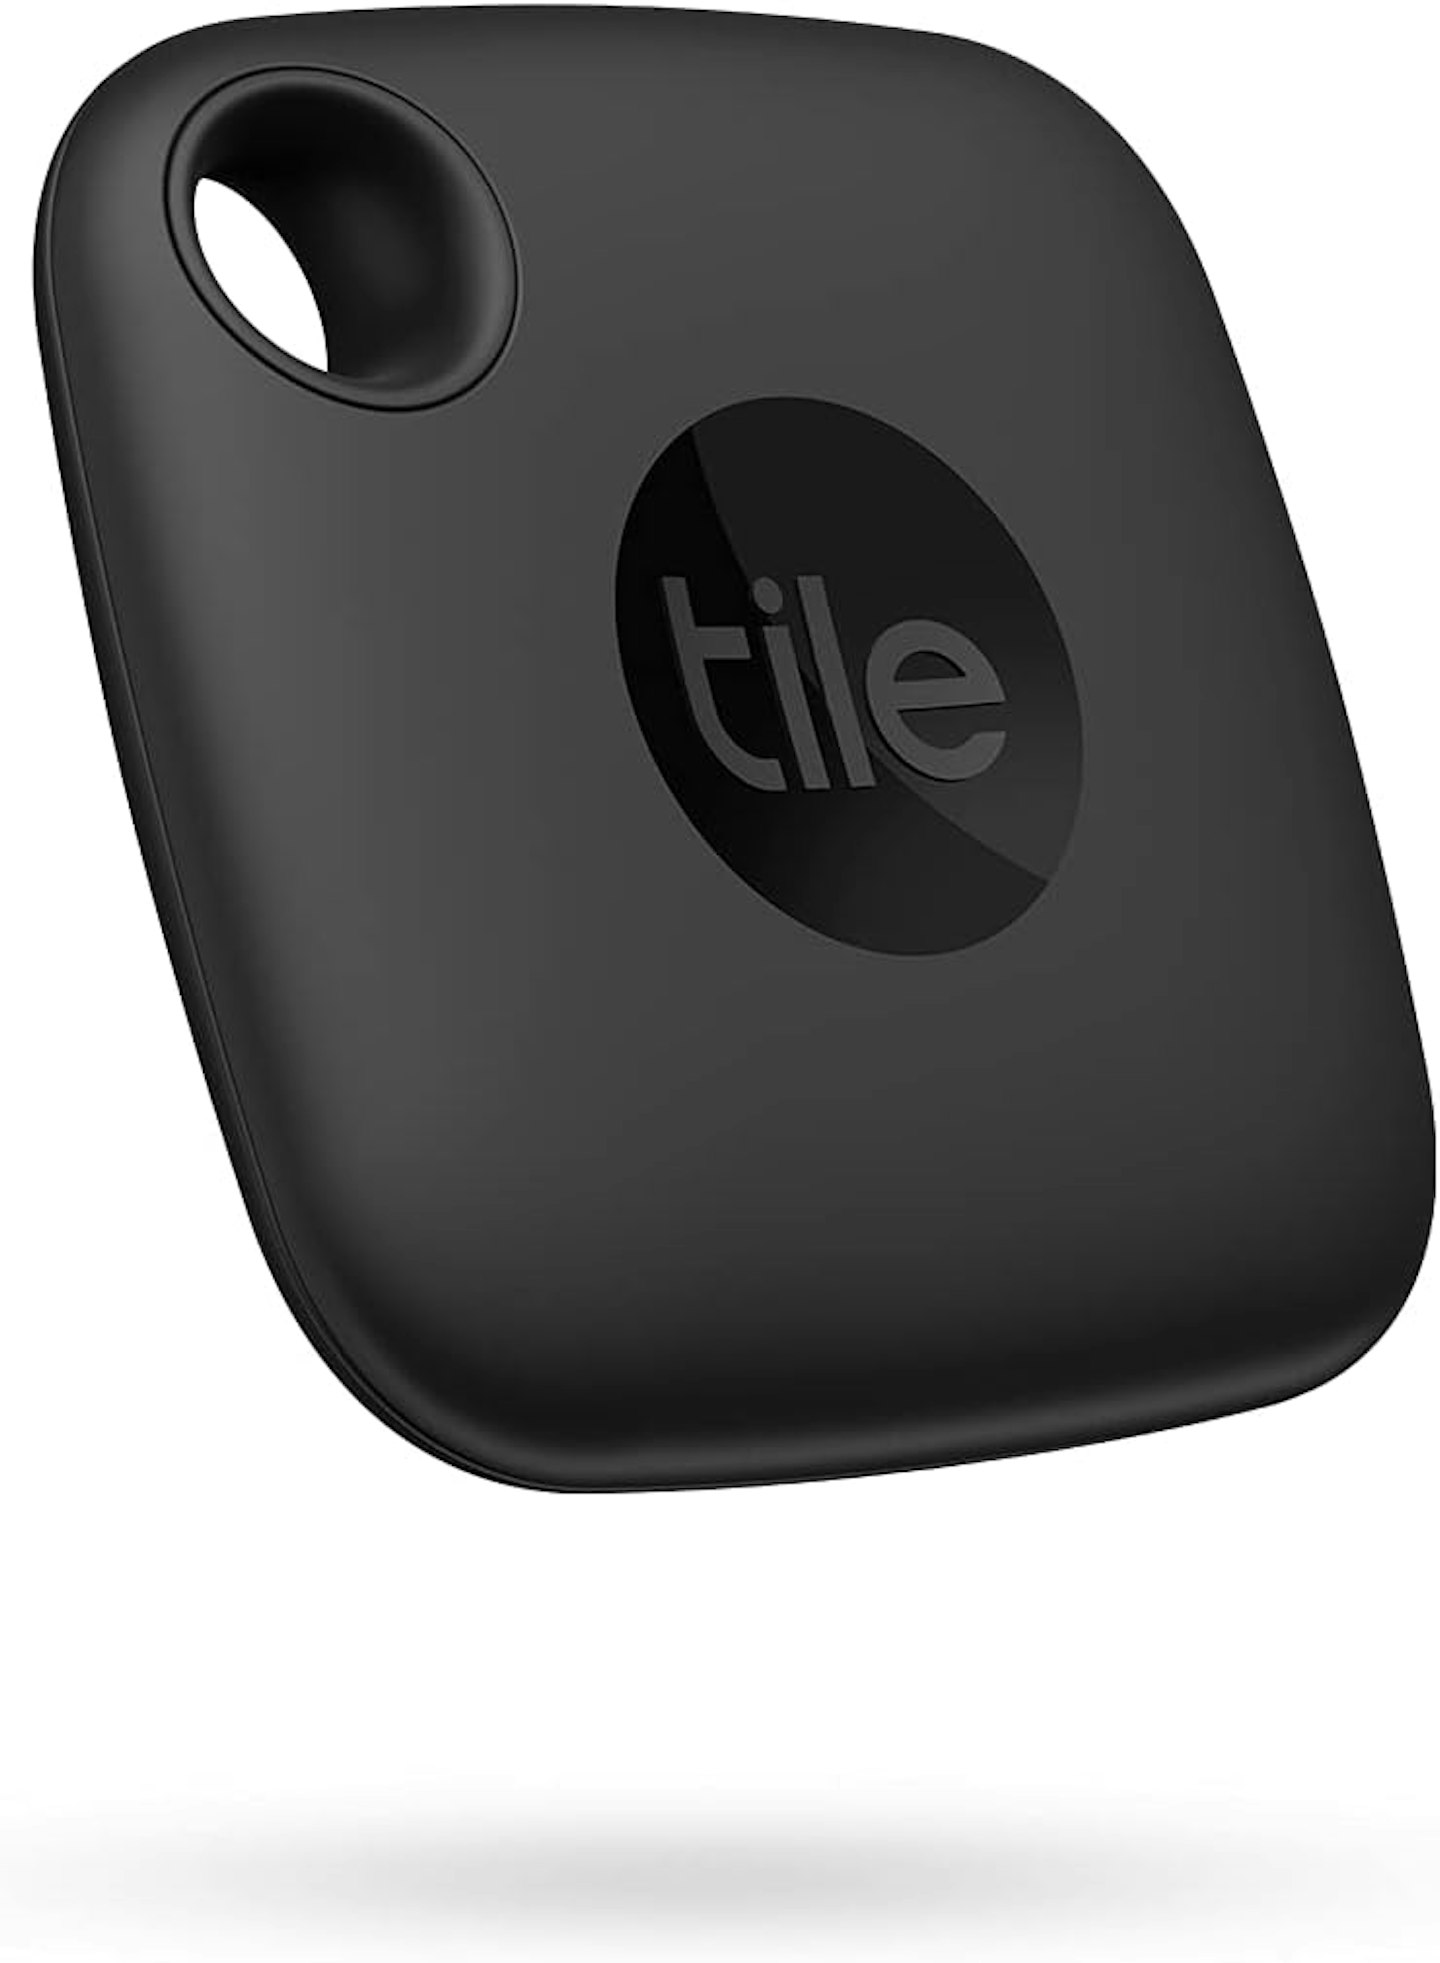 Tile - best luggage trackers